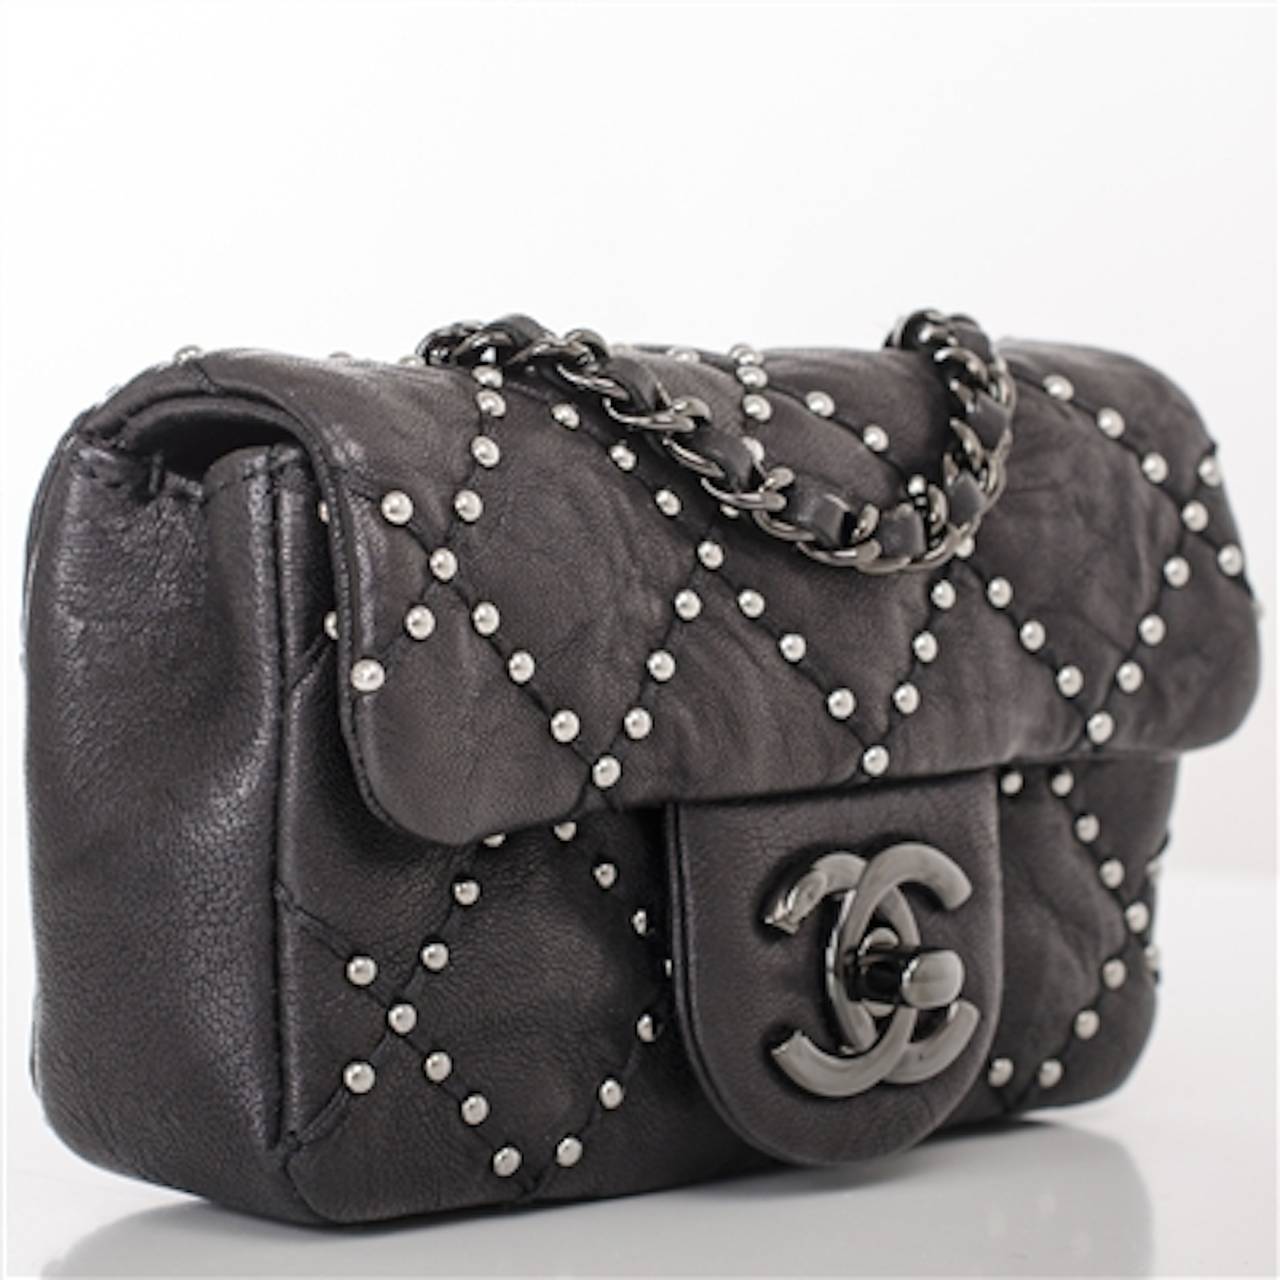 Chanel limited edition black Mini Studded flap bag of distressed lambskin leather with stud accents and aged ruthenium hardware.

Named 2.55 to honor the bag's creation in February 1955, the iconic Chanel bag was a modification of the bag Coco